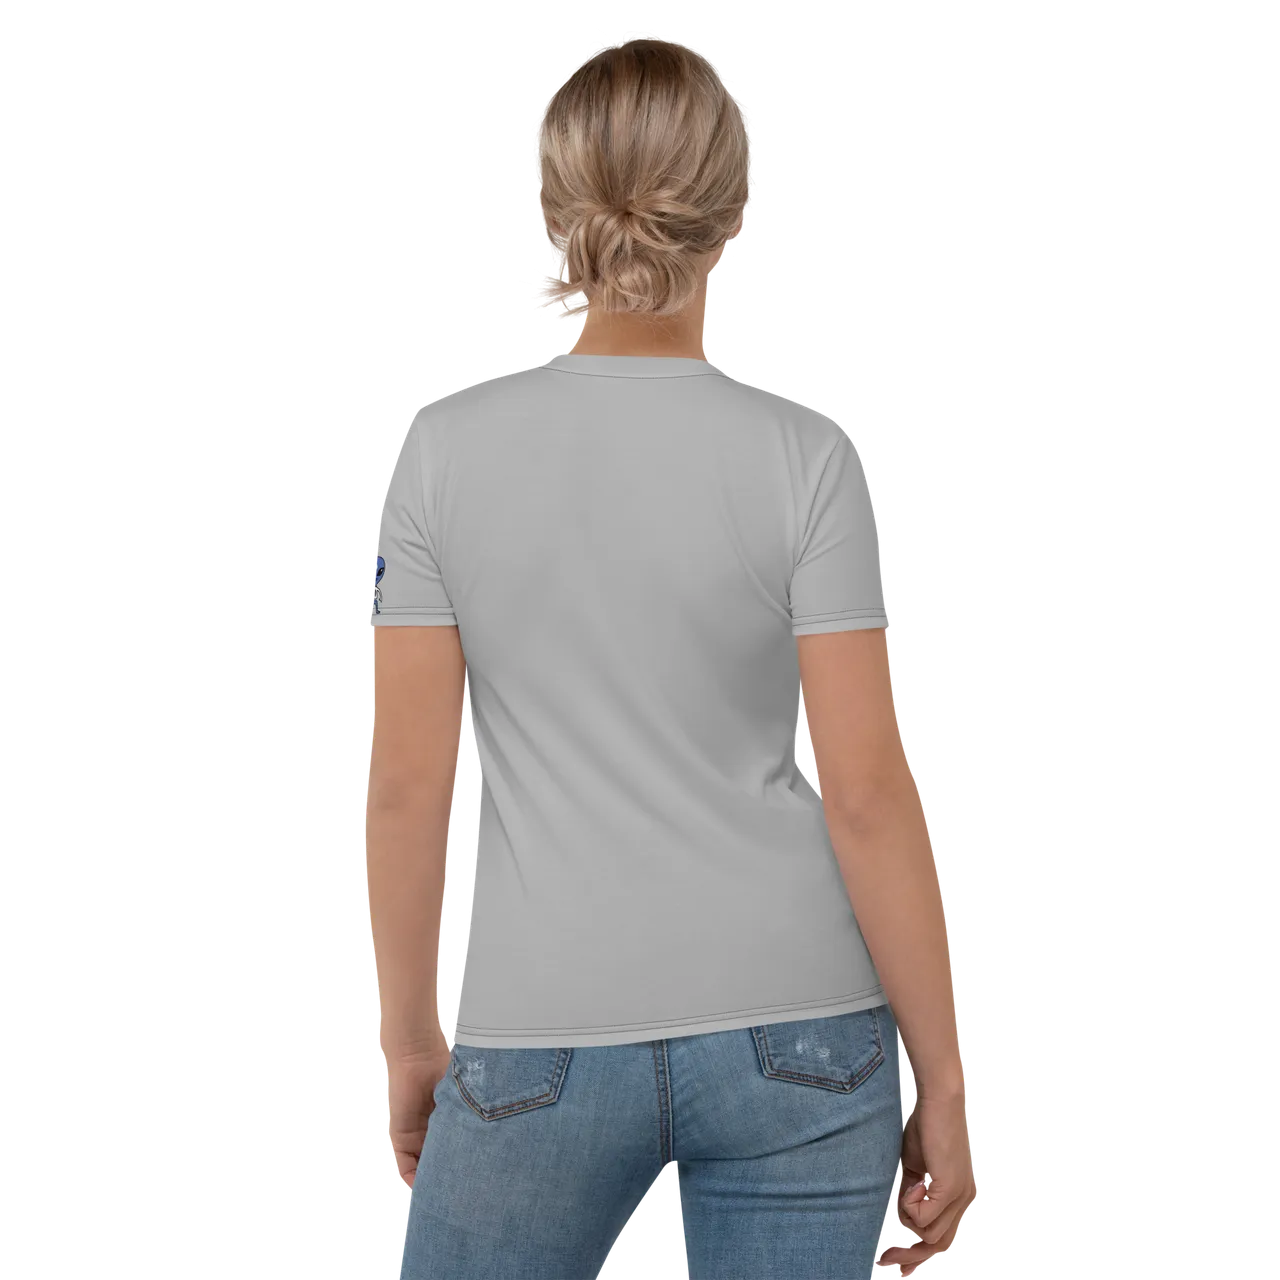 all-over-print-womens-crew-neck-t-shirt-white-back-63781f29210db.png